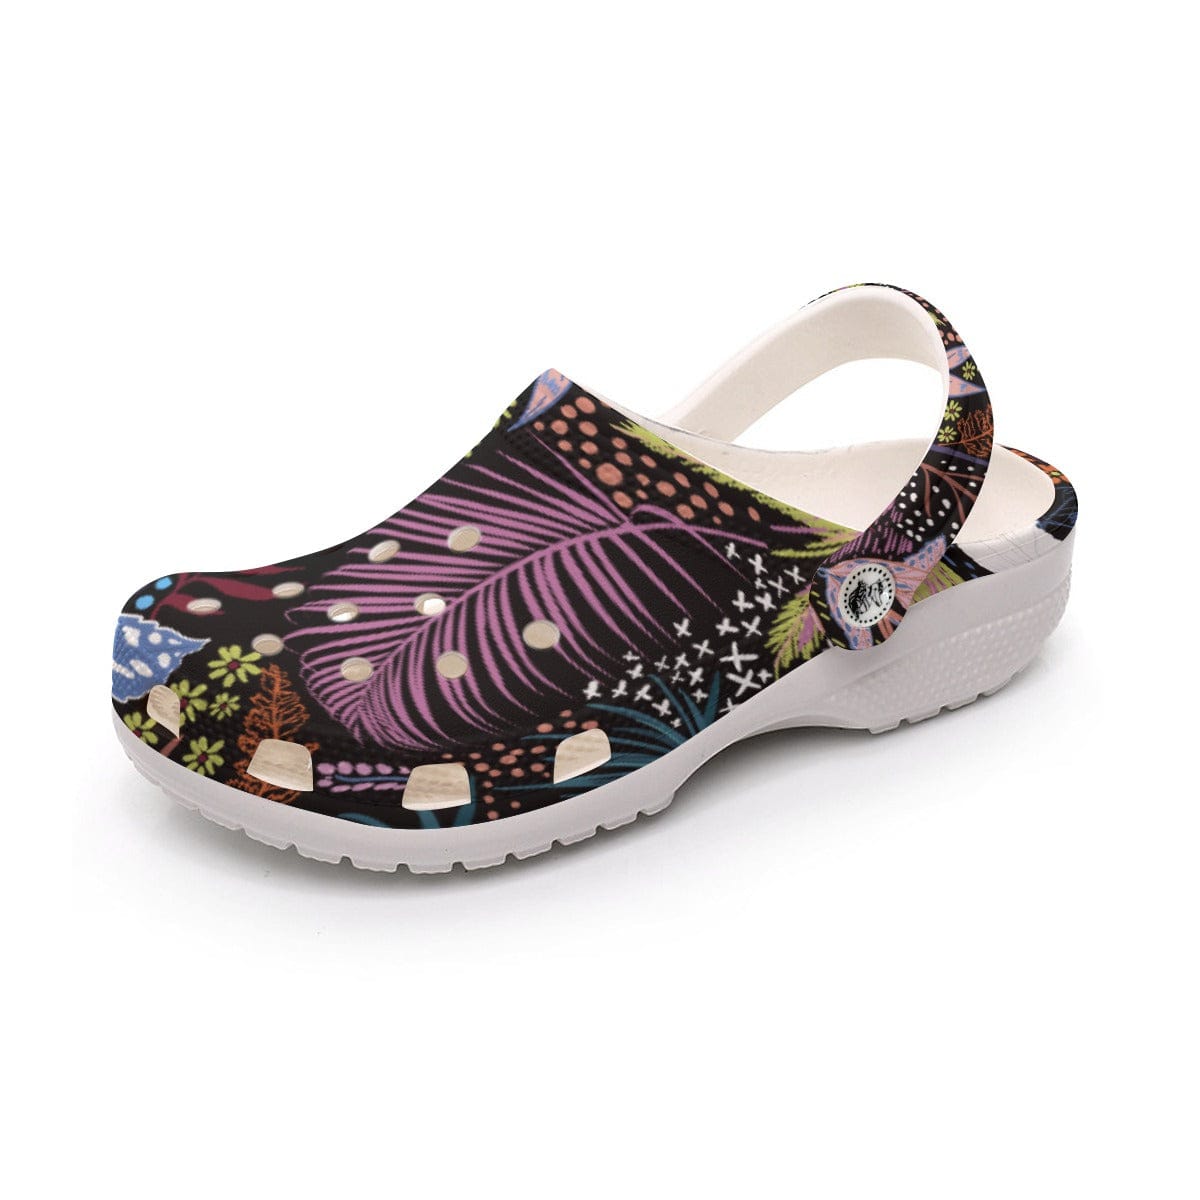 Yoycol Pedal Pops White / US5(EUR36) Blossom Bliss - Women's Classic Clogs Printed